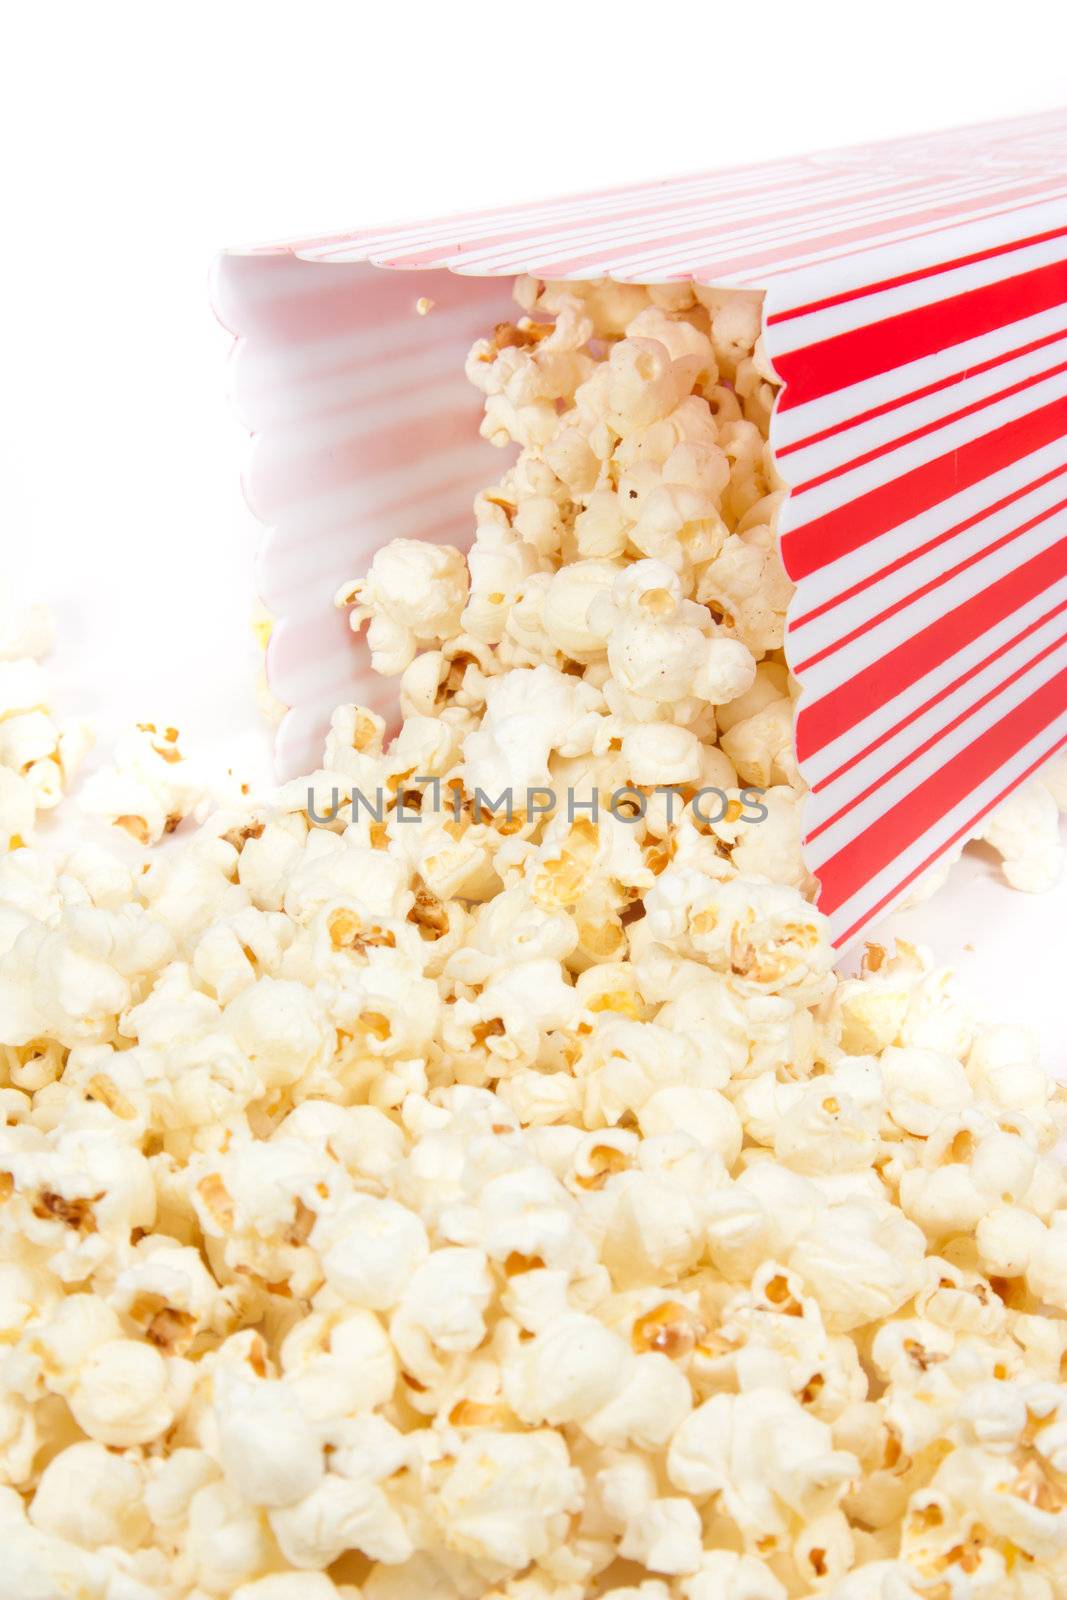 Picture of some popcorn spiiled out